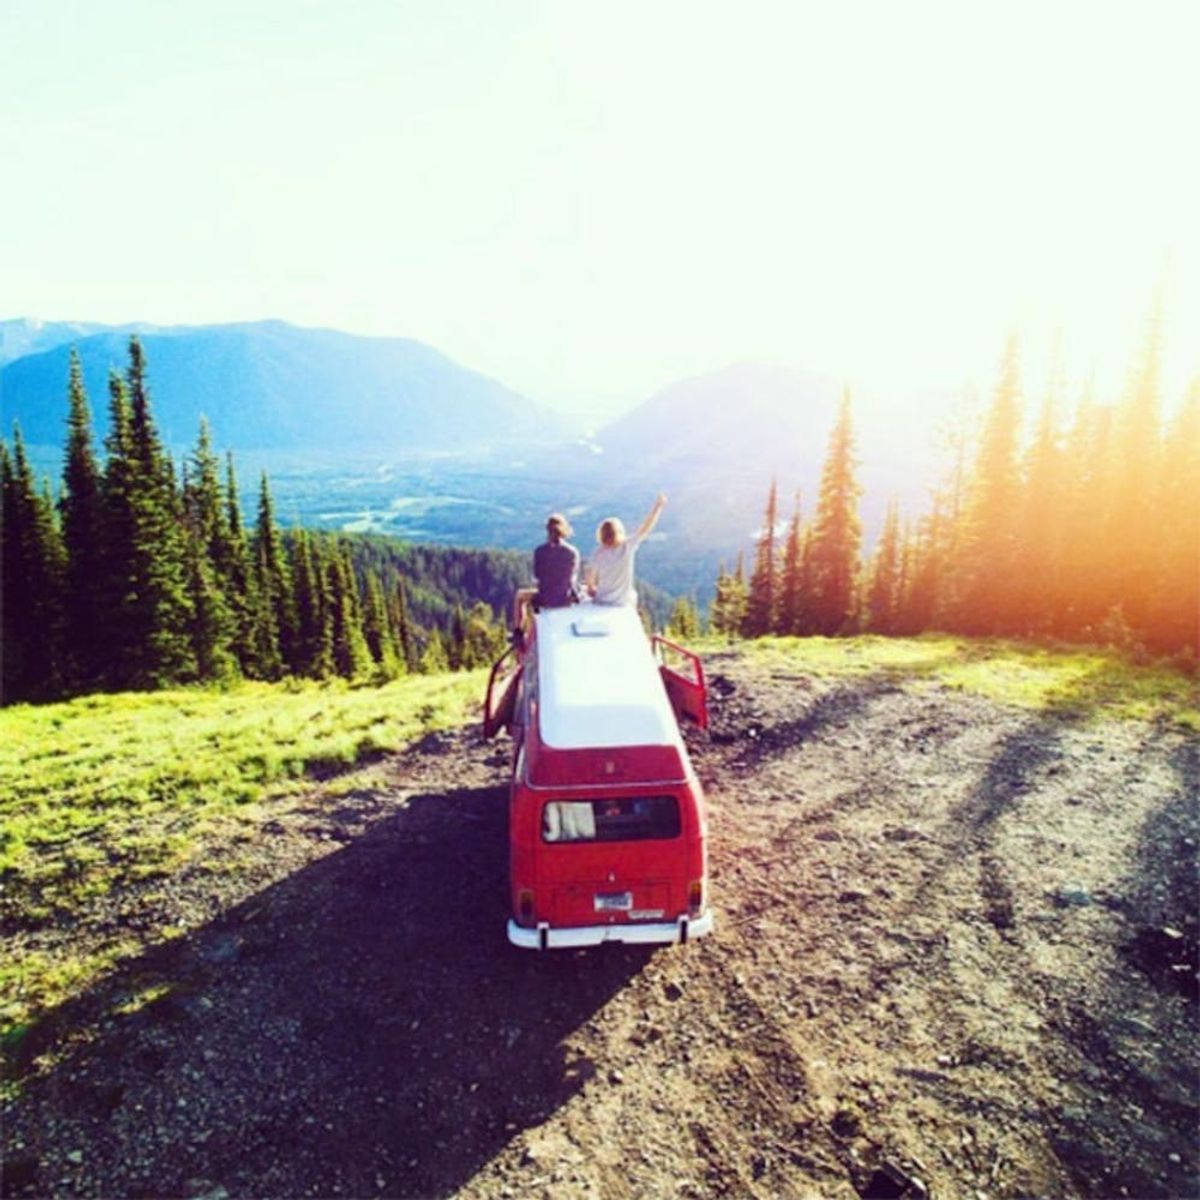 11 Instagram Glamping Shots That Will Have You Ready to Pack Your Bags